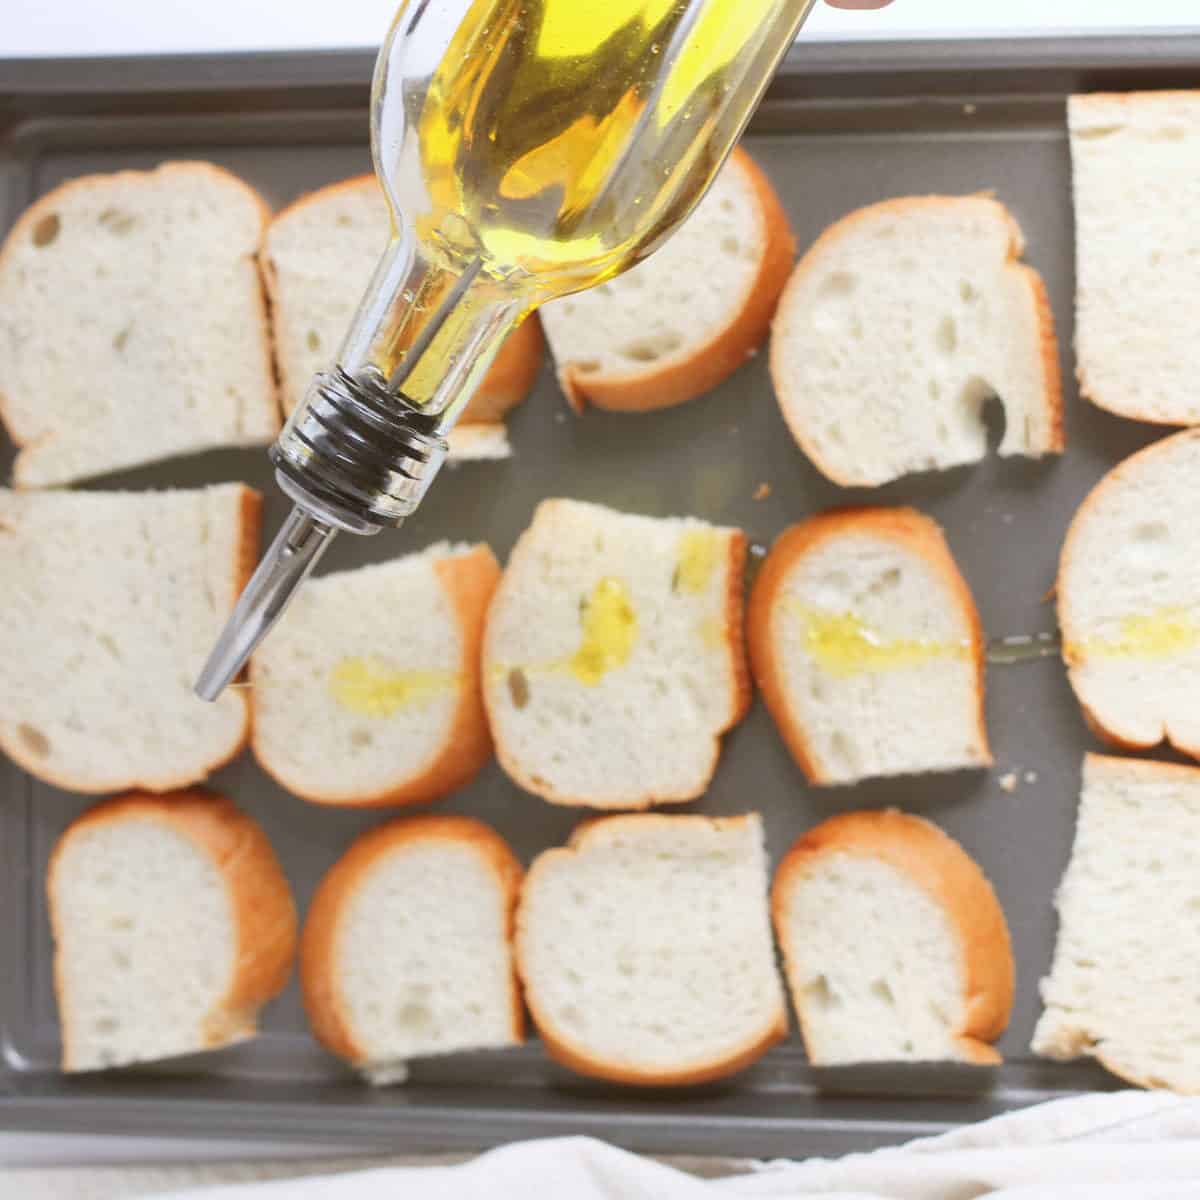 olive oil drizzled on french bread for toasting.